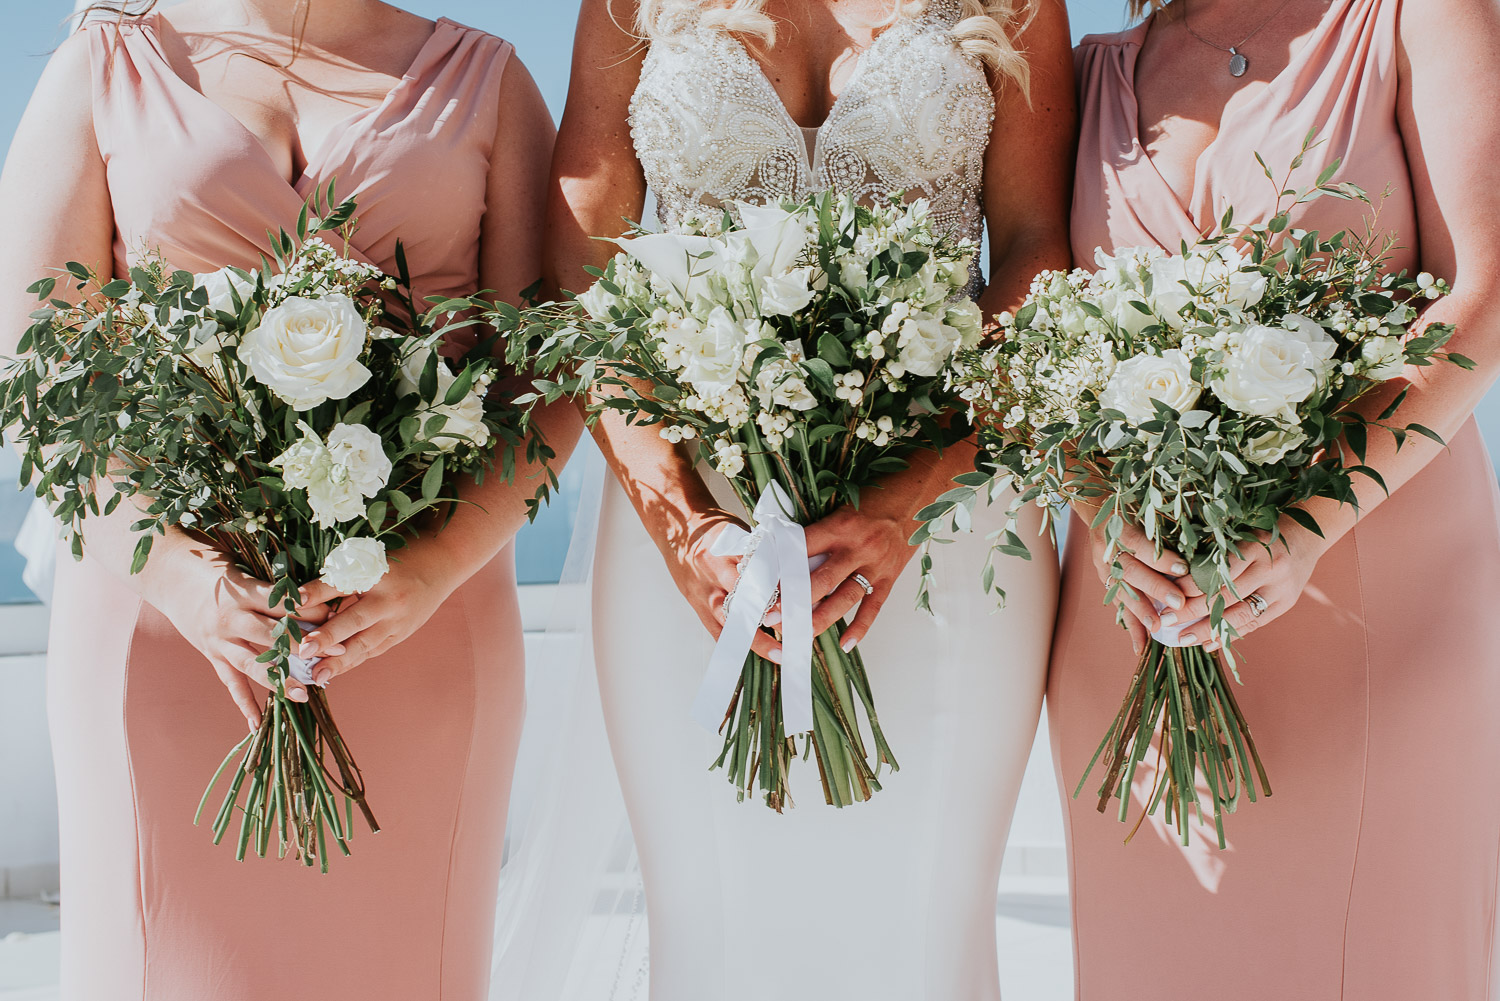 Wedding photographer Santorini: close up of the bride and her bridesmaids holding their beautiful bouquets by Ben and Vesna.